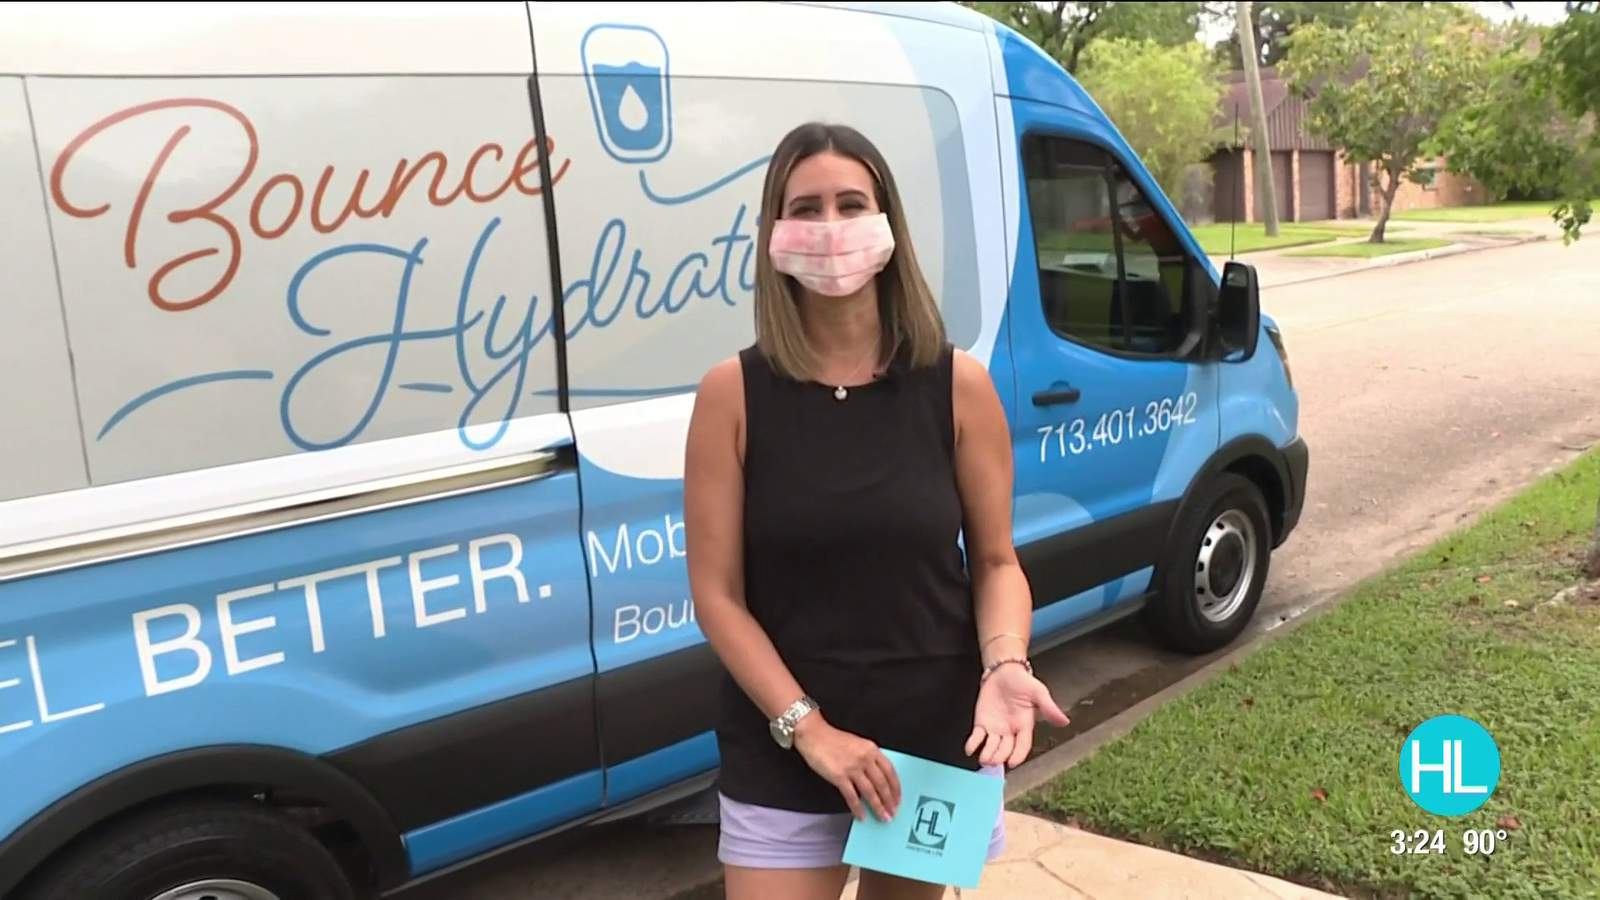 Houston’s mobile Bounce Hydration answers our IV drip therapy questions